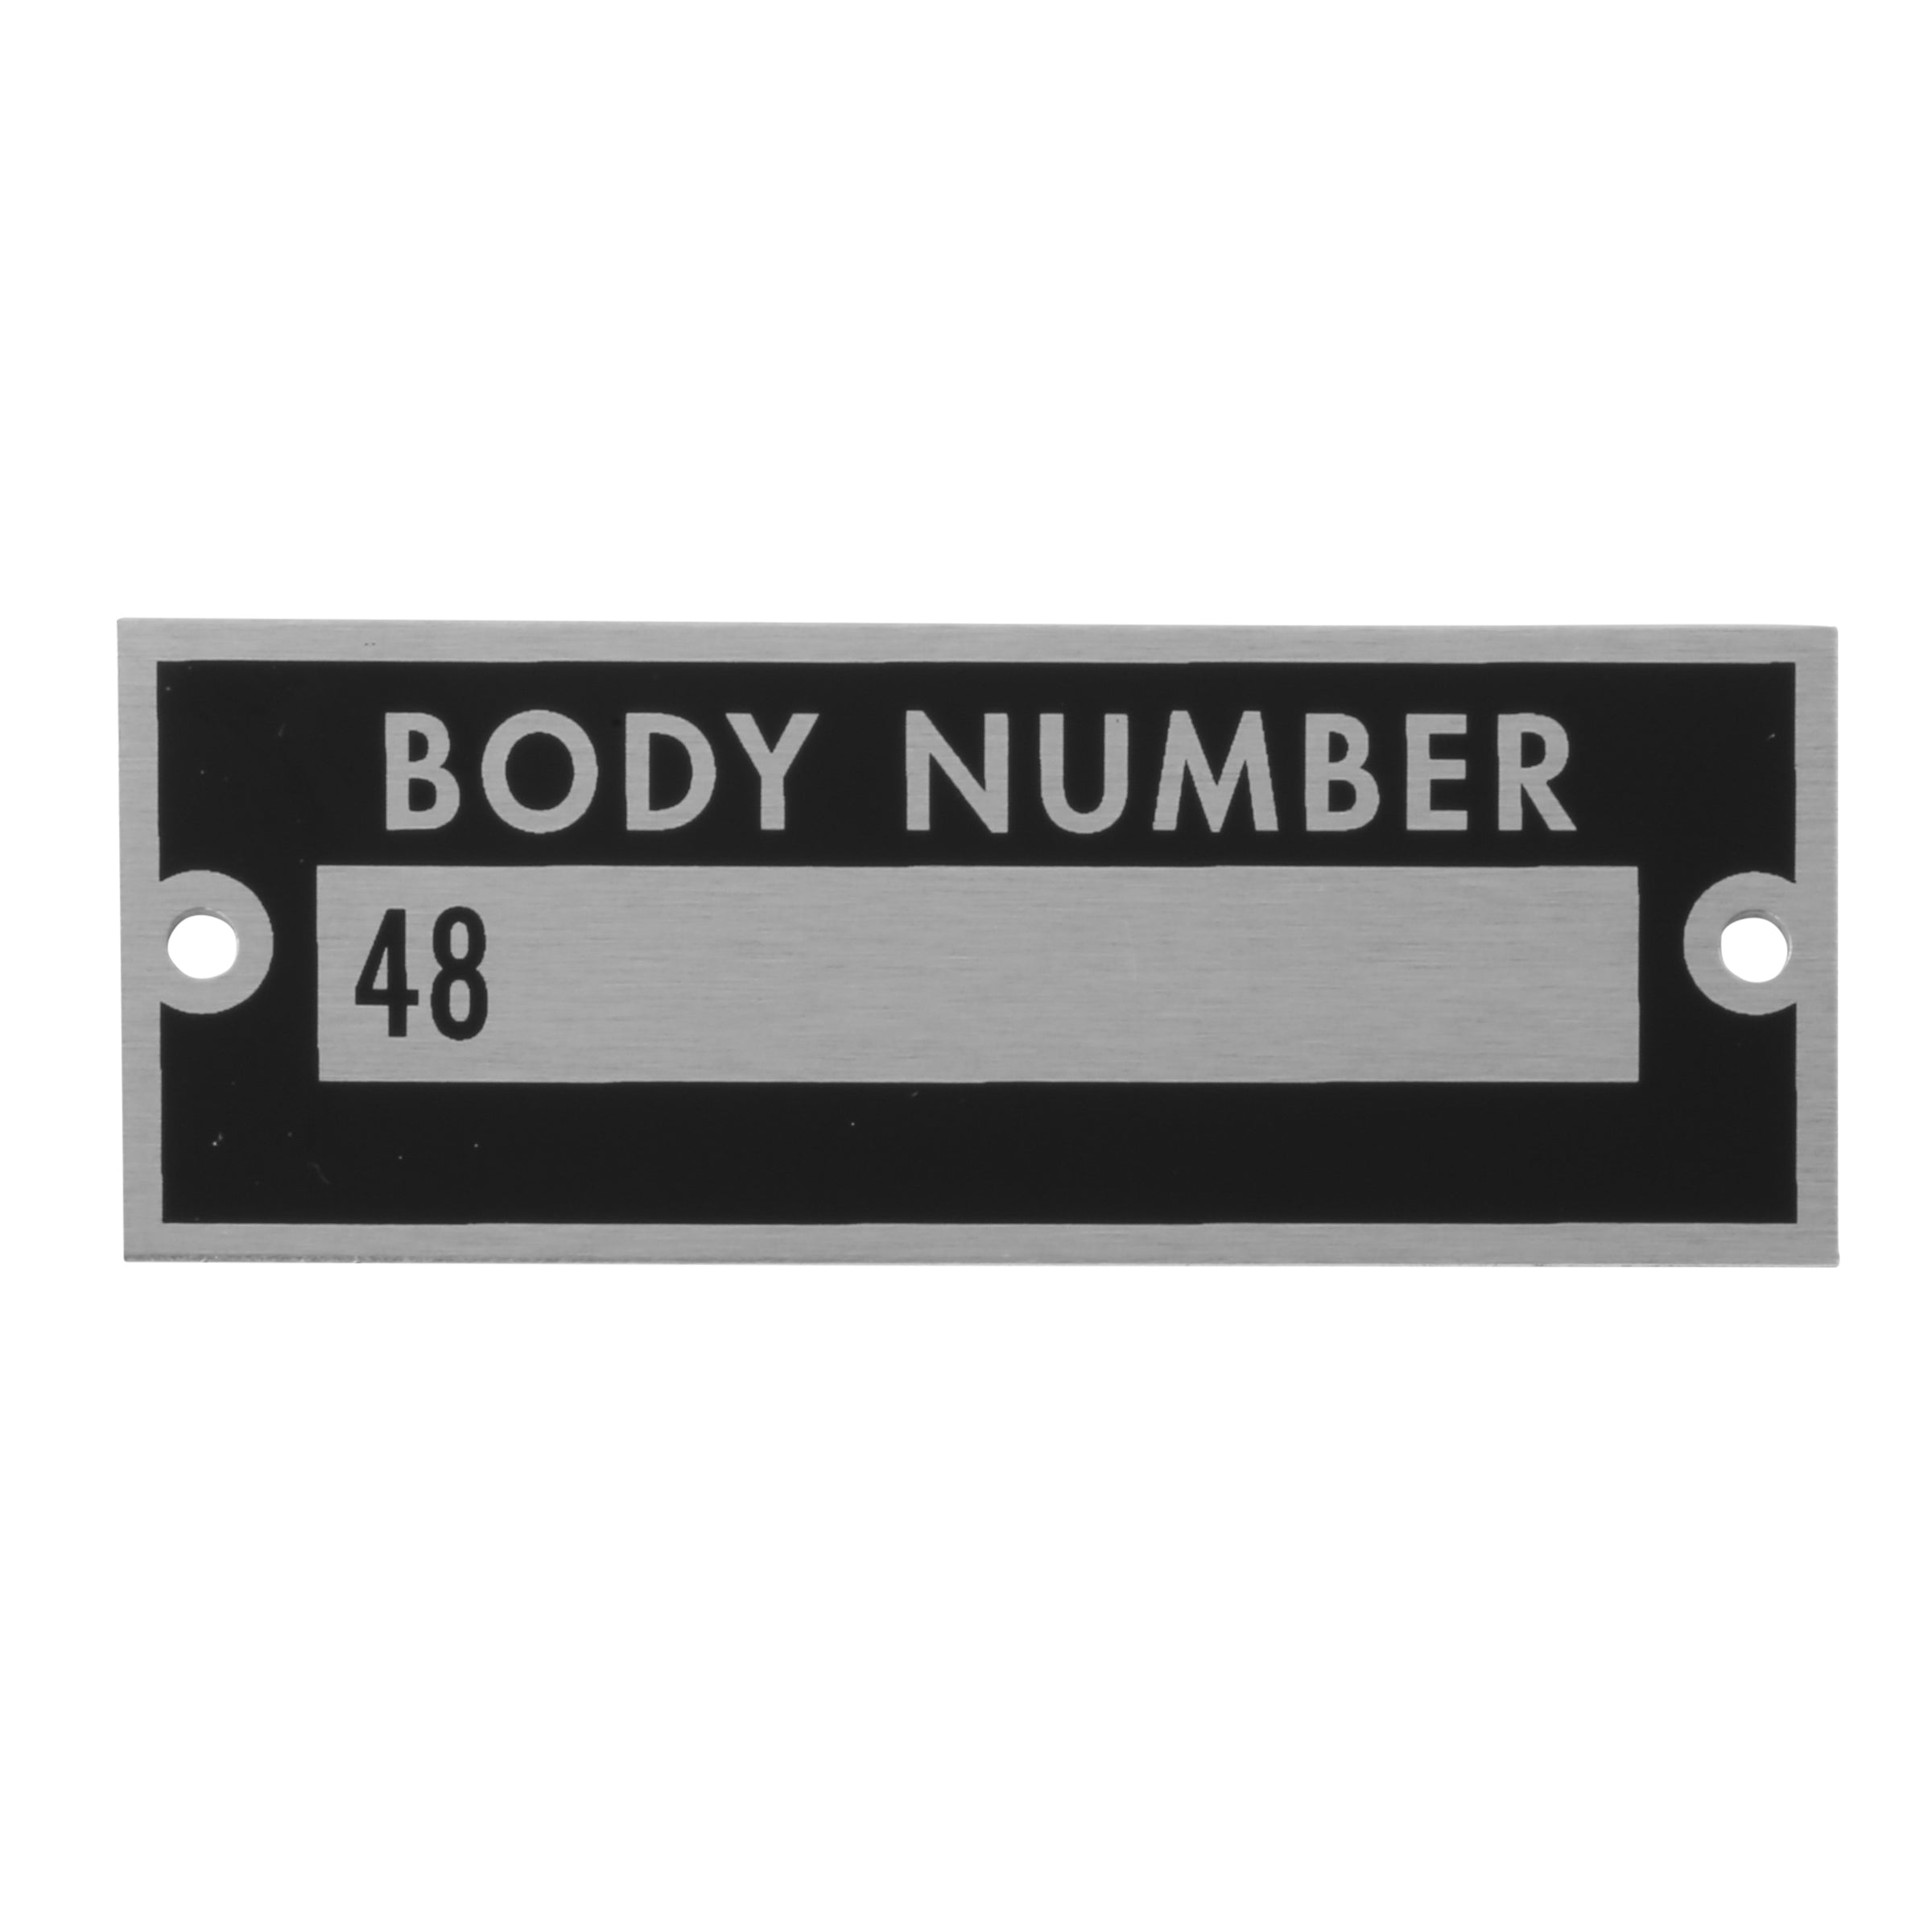 Body Number Plate • 1935 Ford Passenger